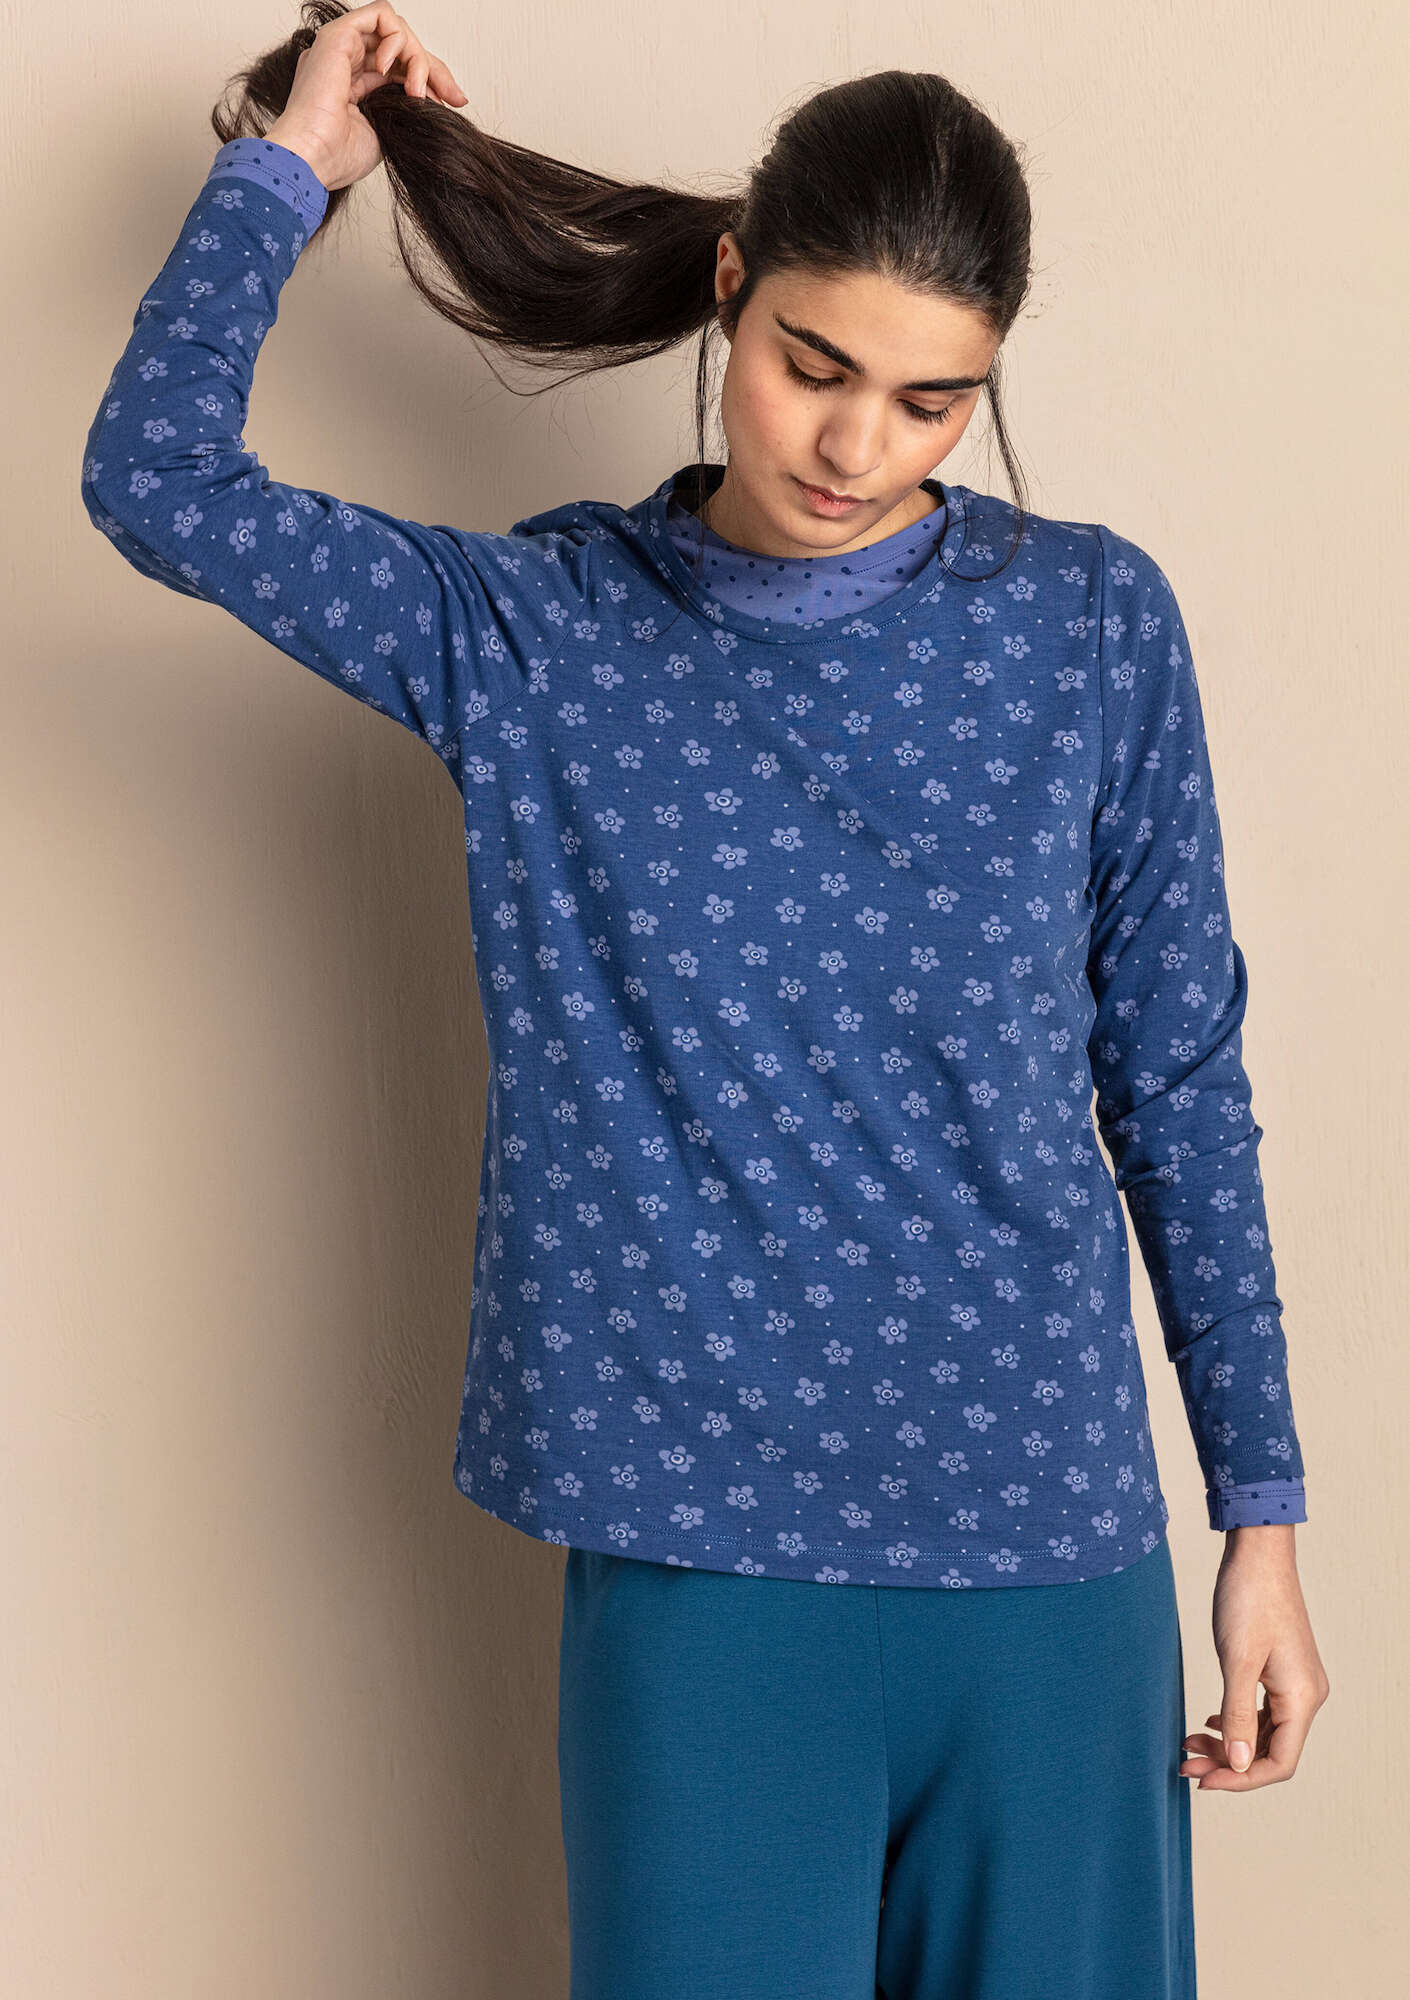 Tricot top Pytte indigo blue/patterned